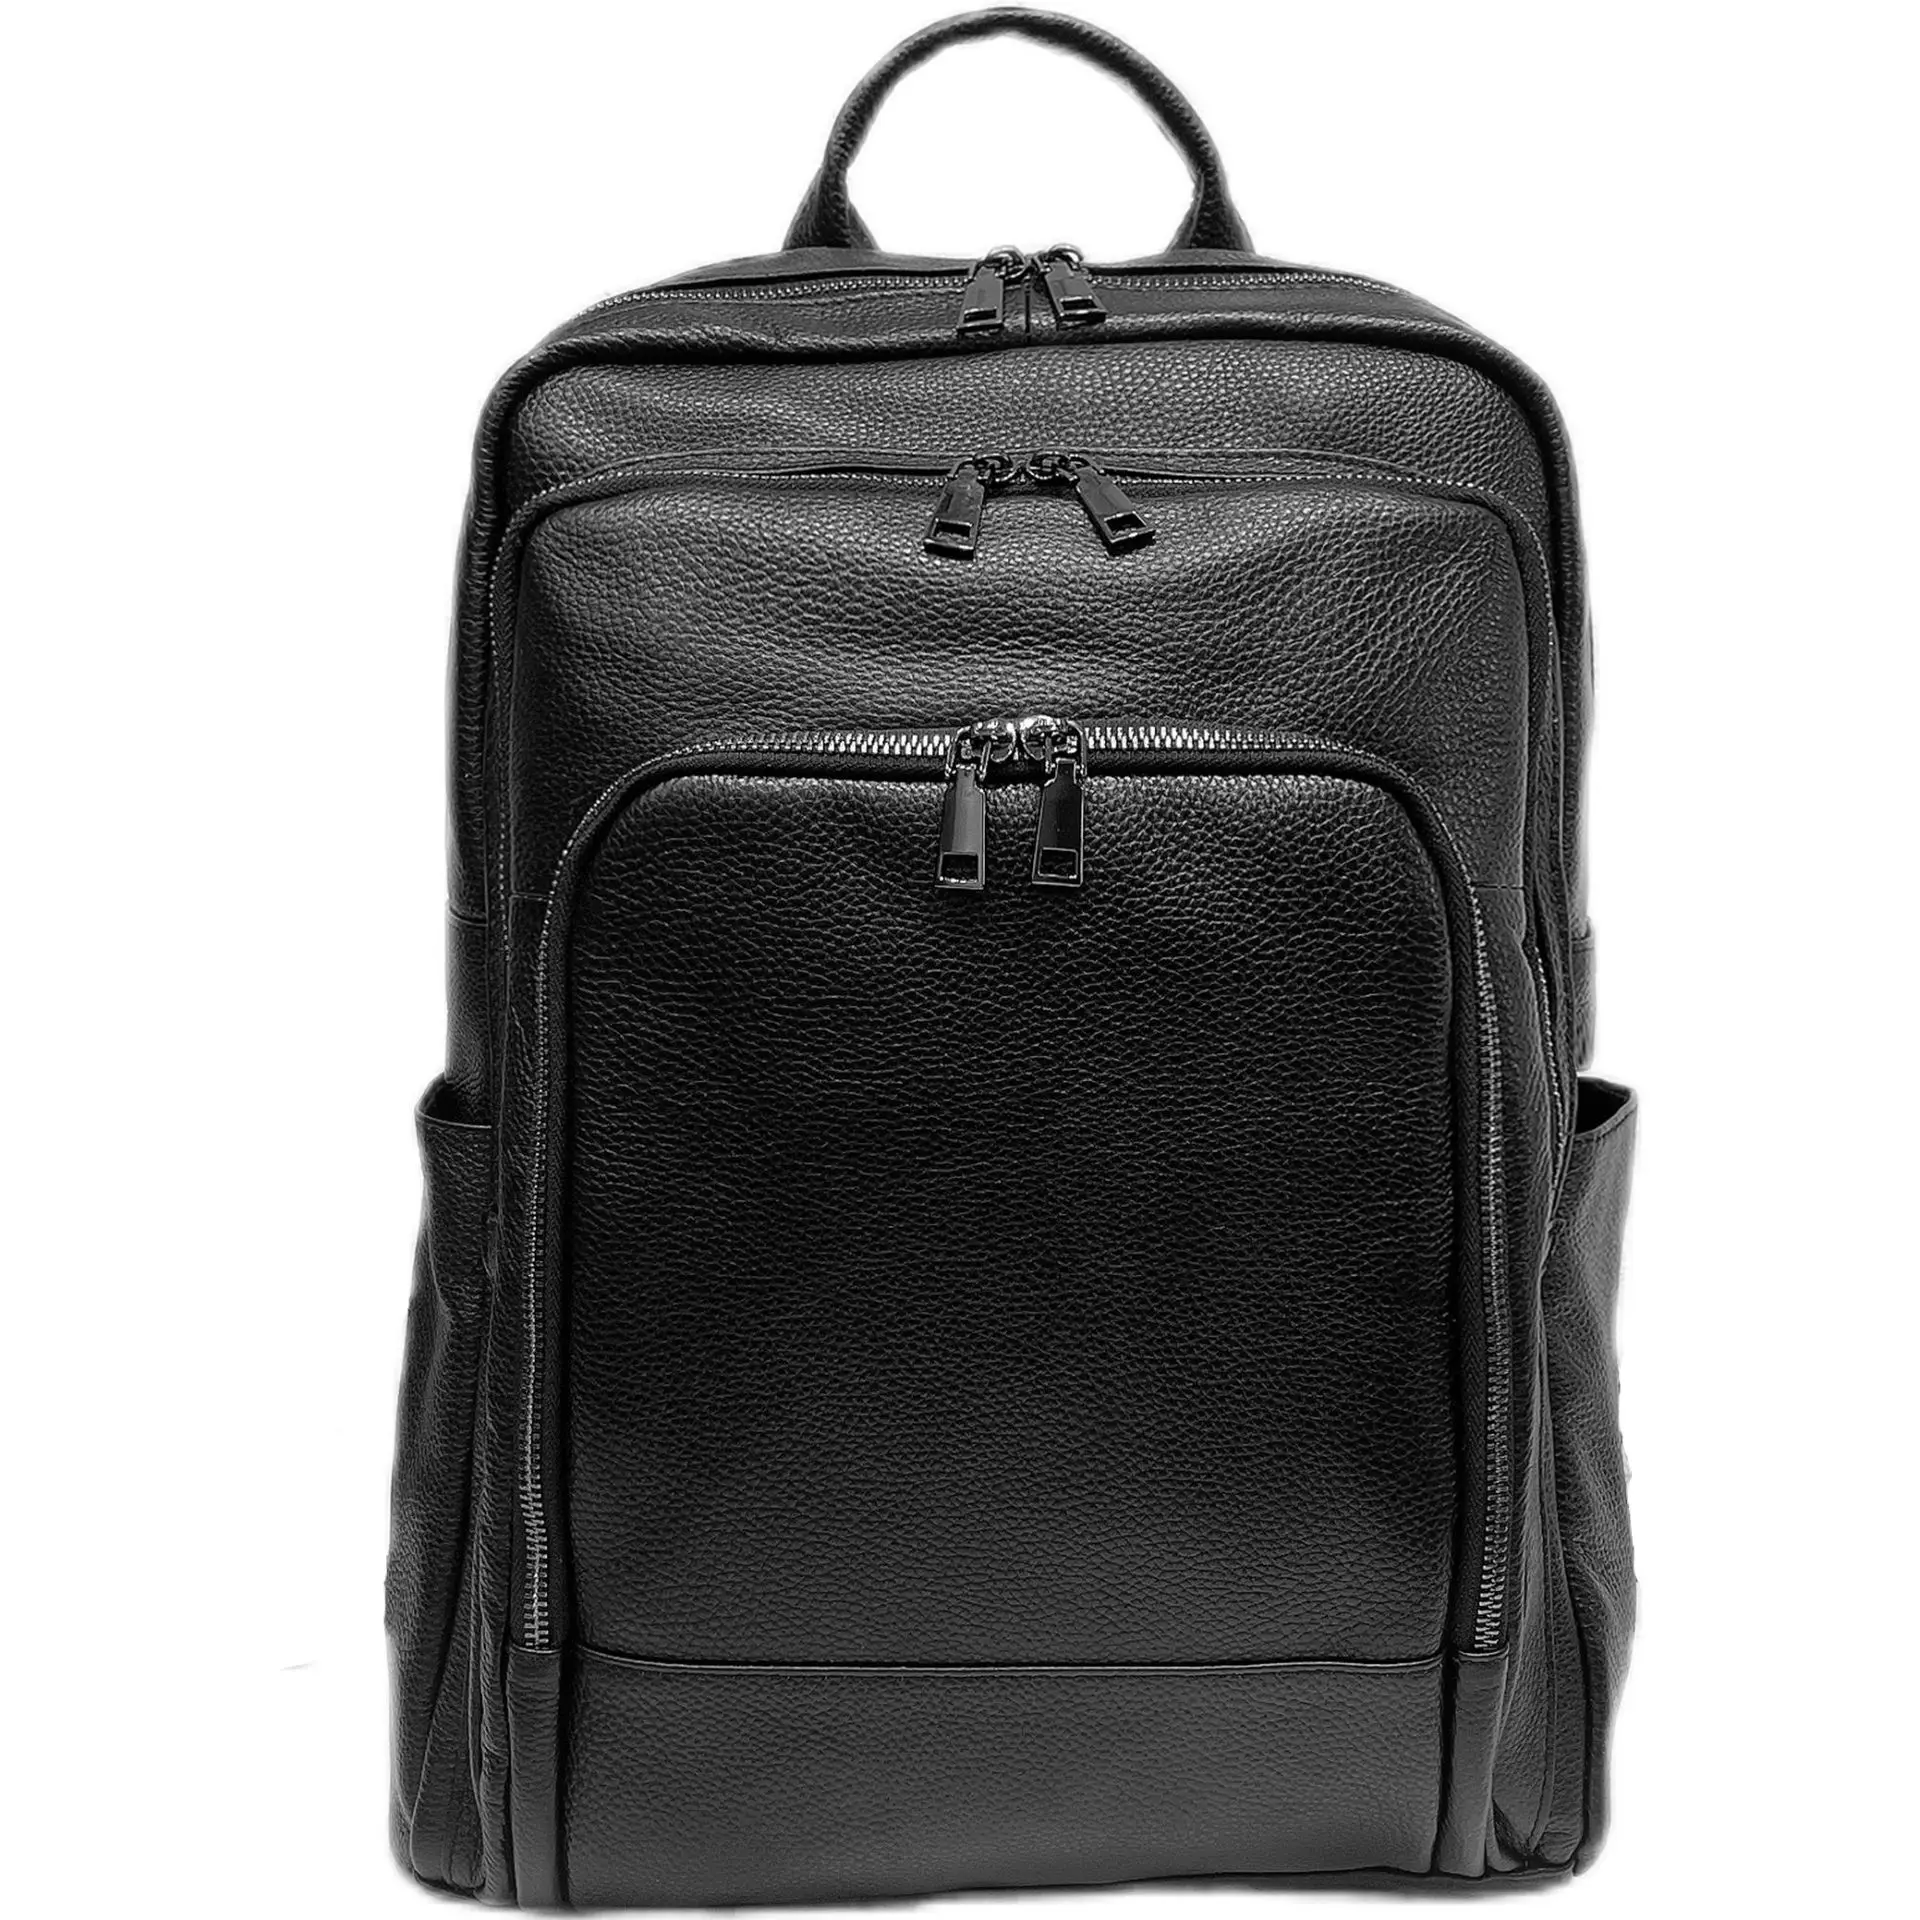 2021 Fashion Cow Genuine Leather Men Backpack Real Natural Leather Student Backpack Boy Luxury Brand Large Computer Laptop Bag